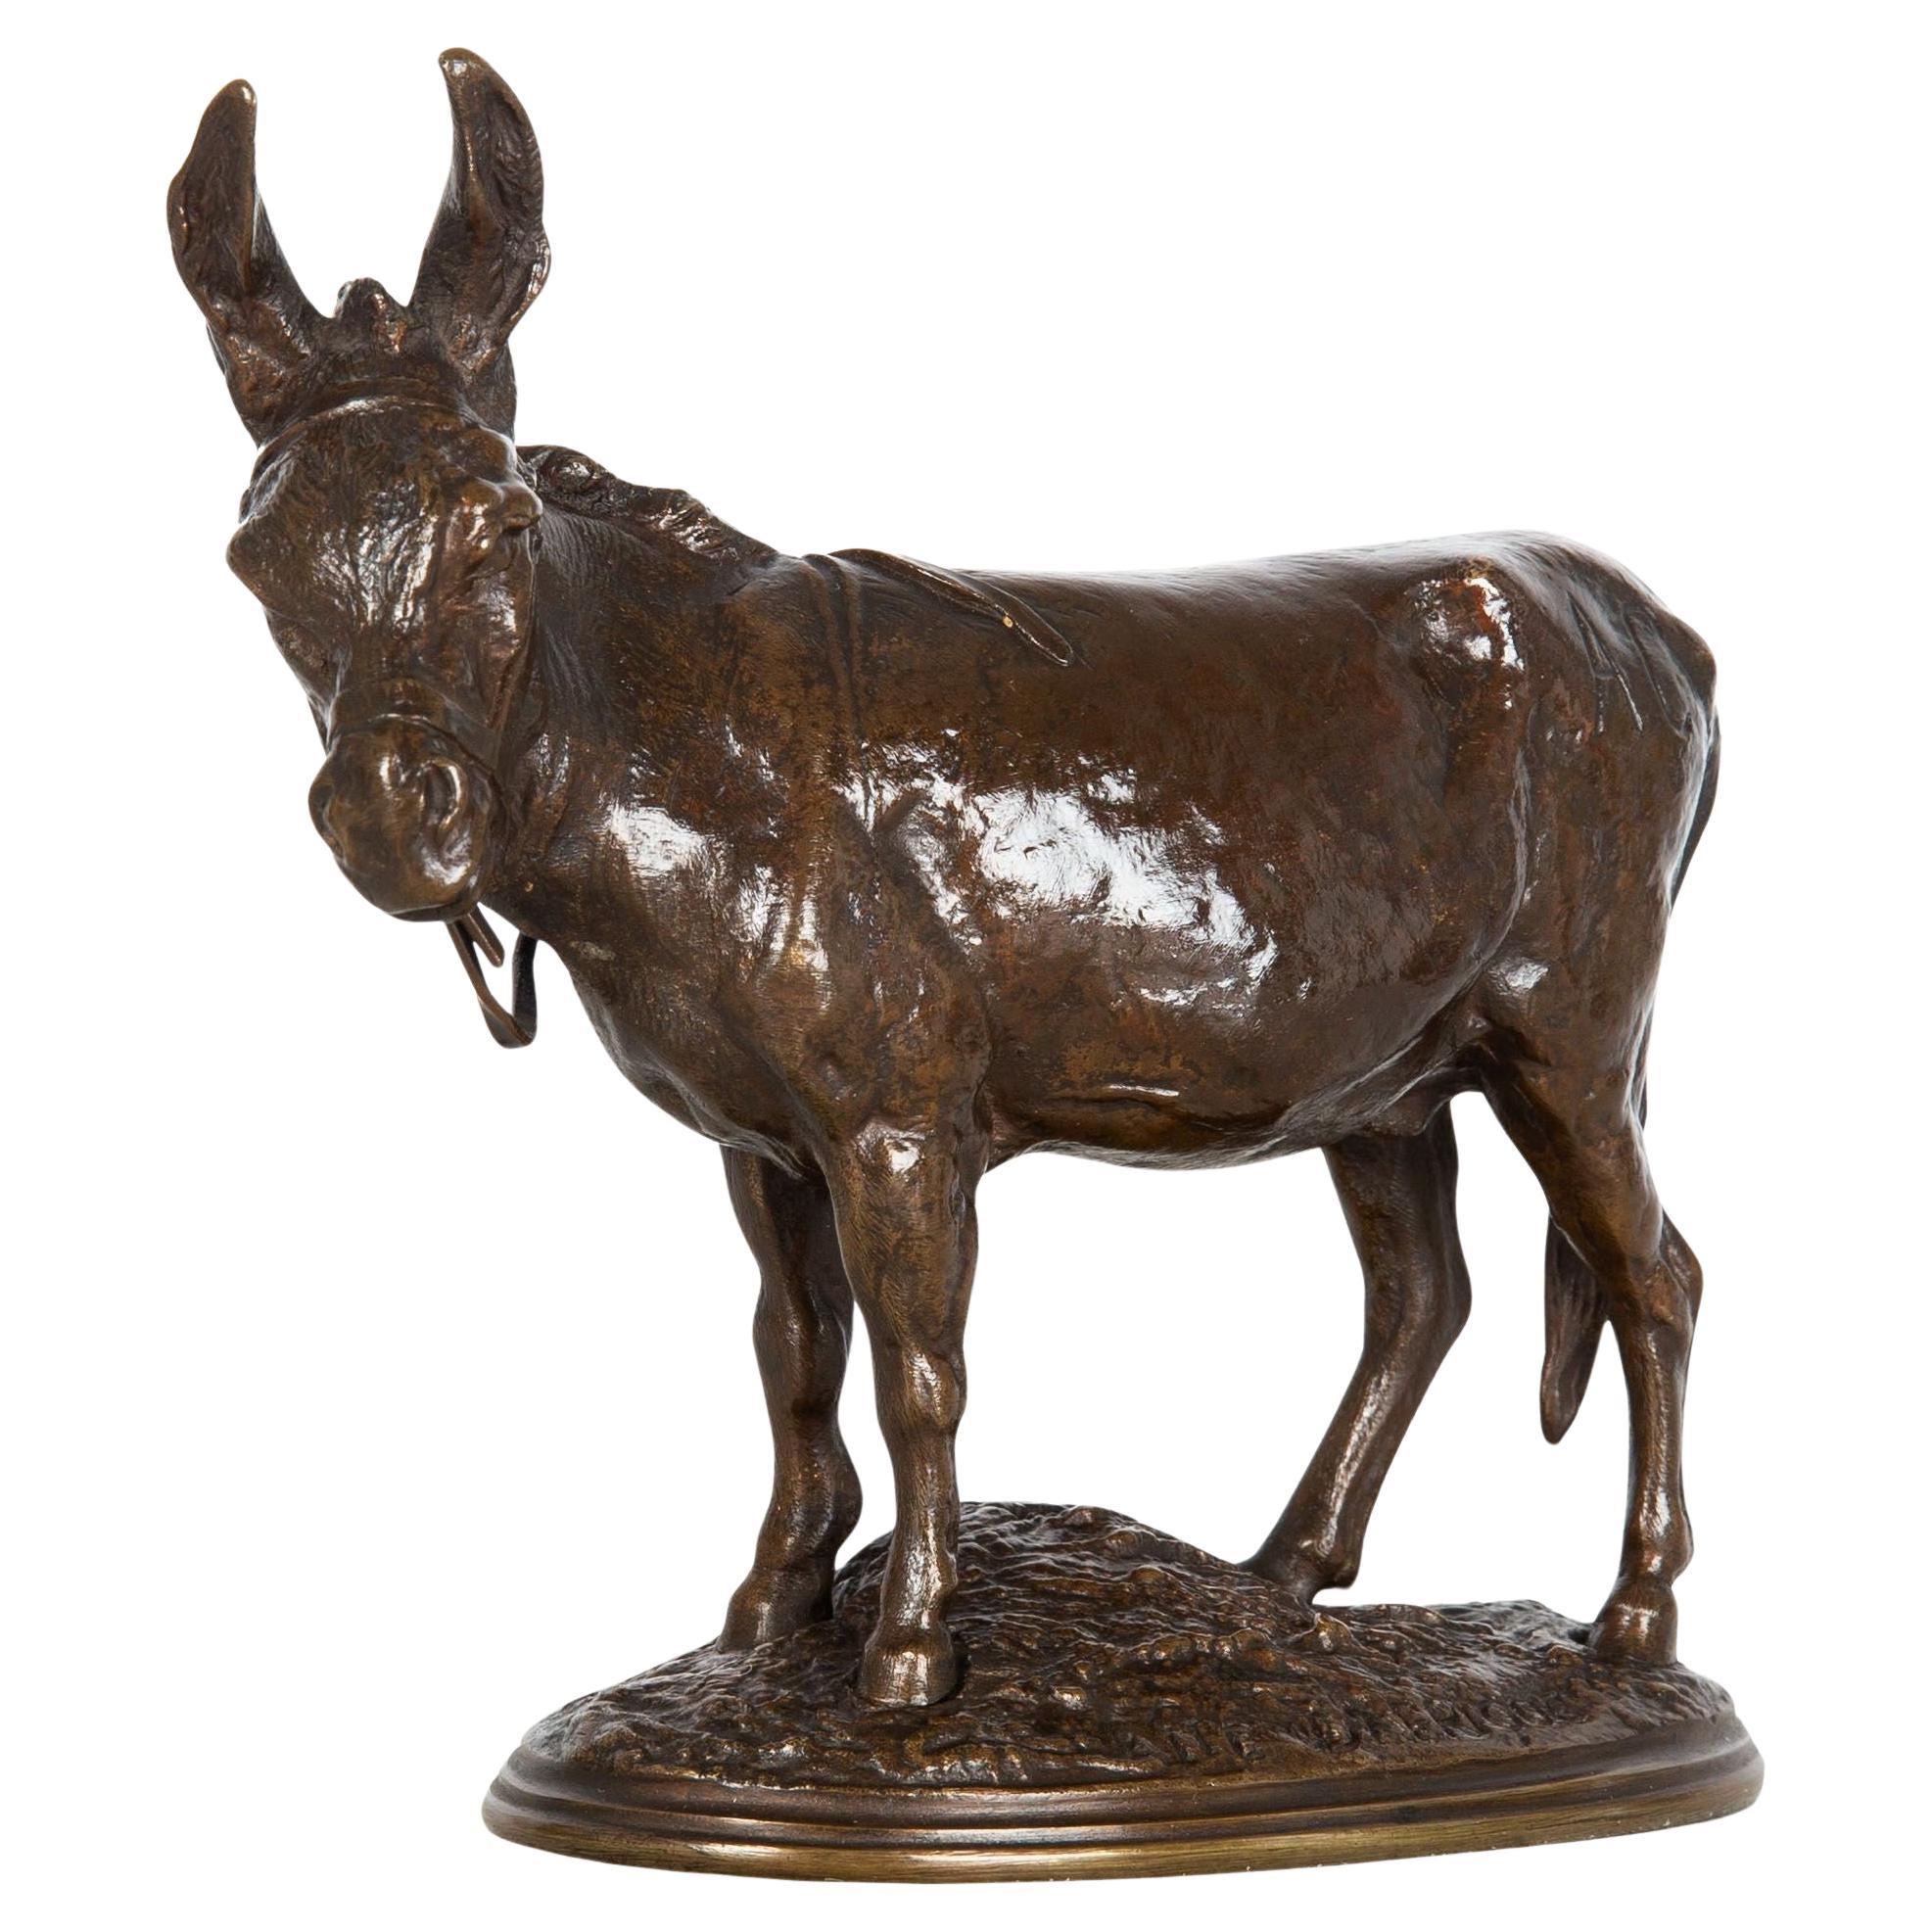 French Antique Bronze Sculpture of “African Donkey” by Auguste Cain